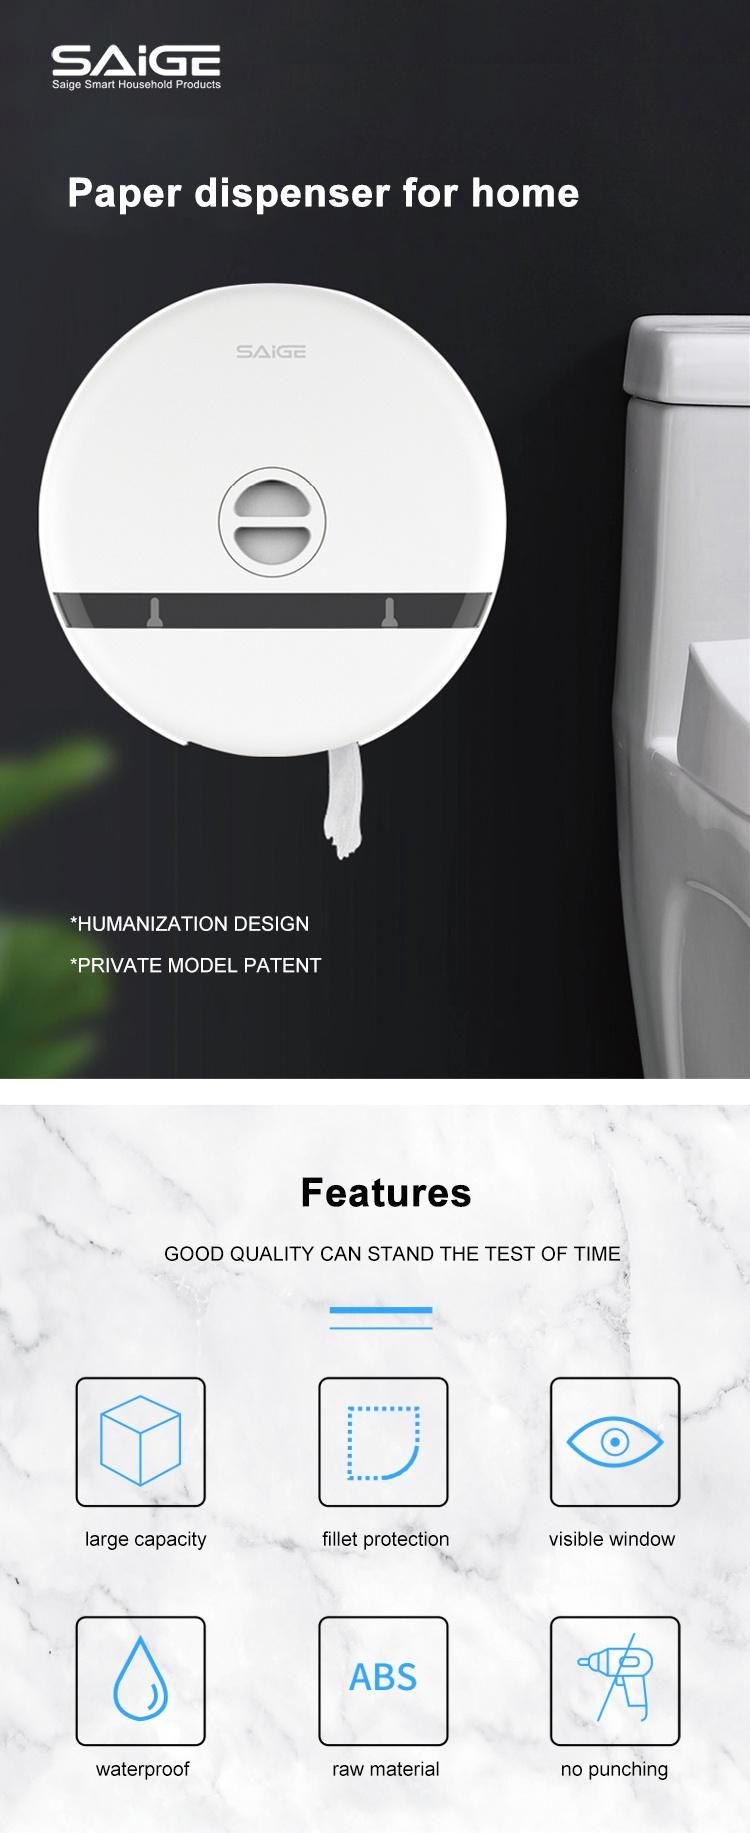 Saige New Arrival Wall Mounted ABS Plastic Toilet Jumbo Roll Paper Dispenser